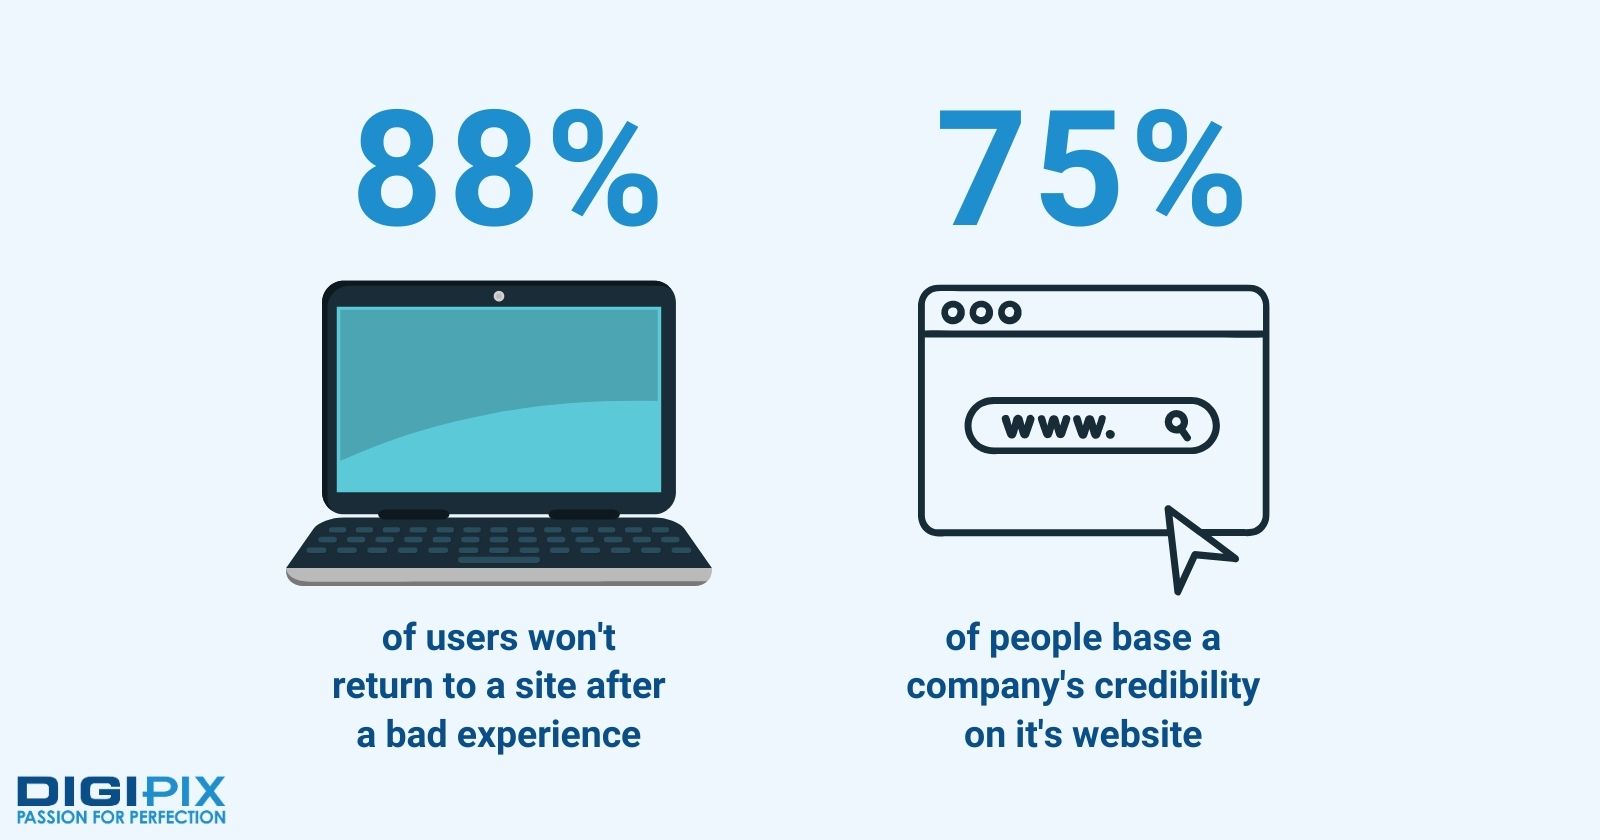 Two statistics on user experience and company's credibility